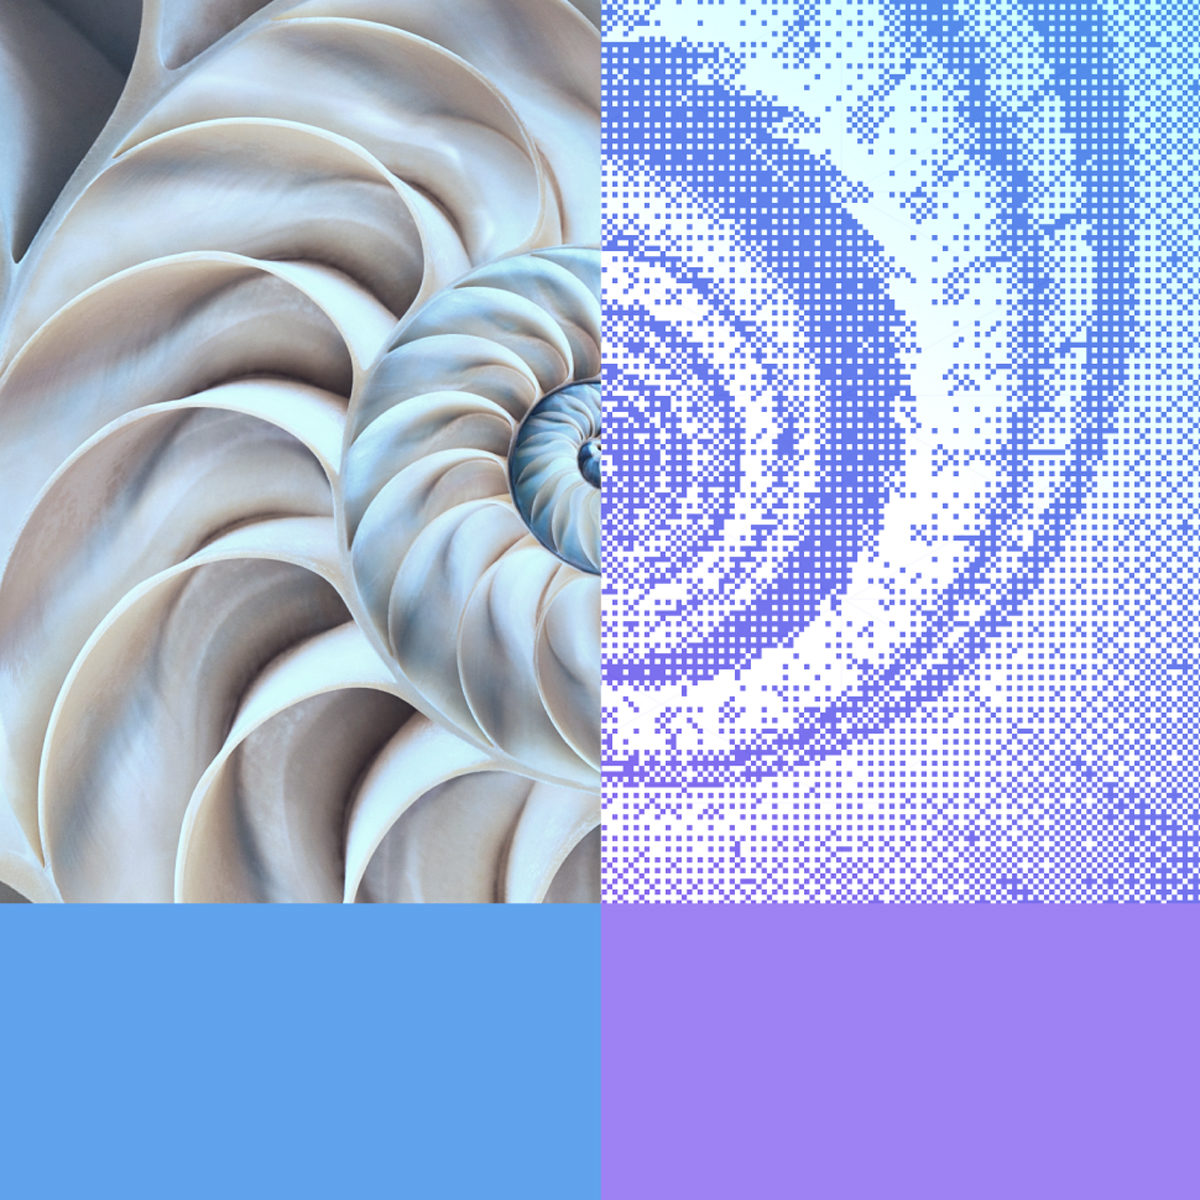 Two sided picture of a shell representing abstract data models.